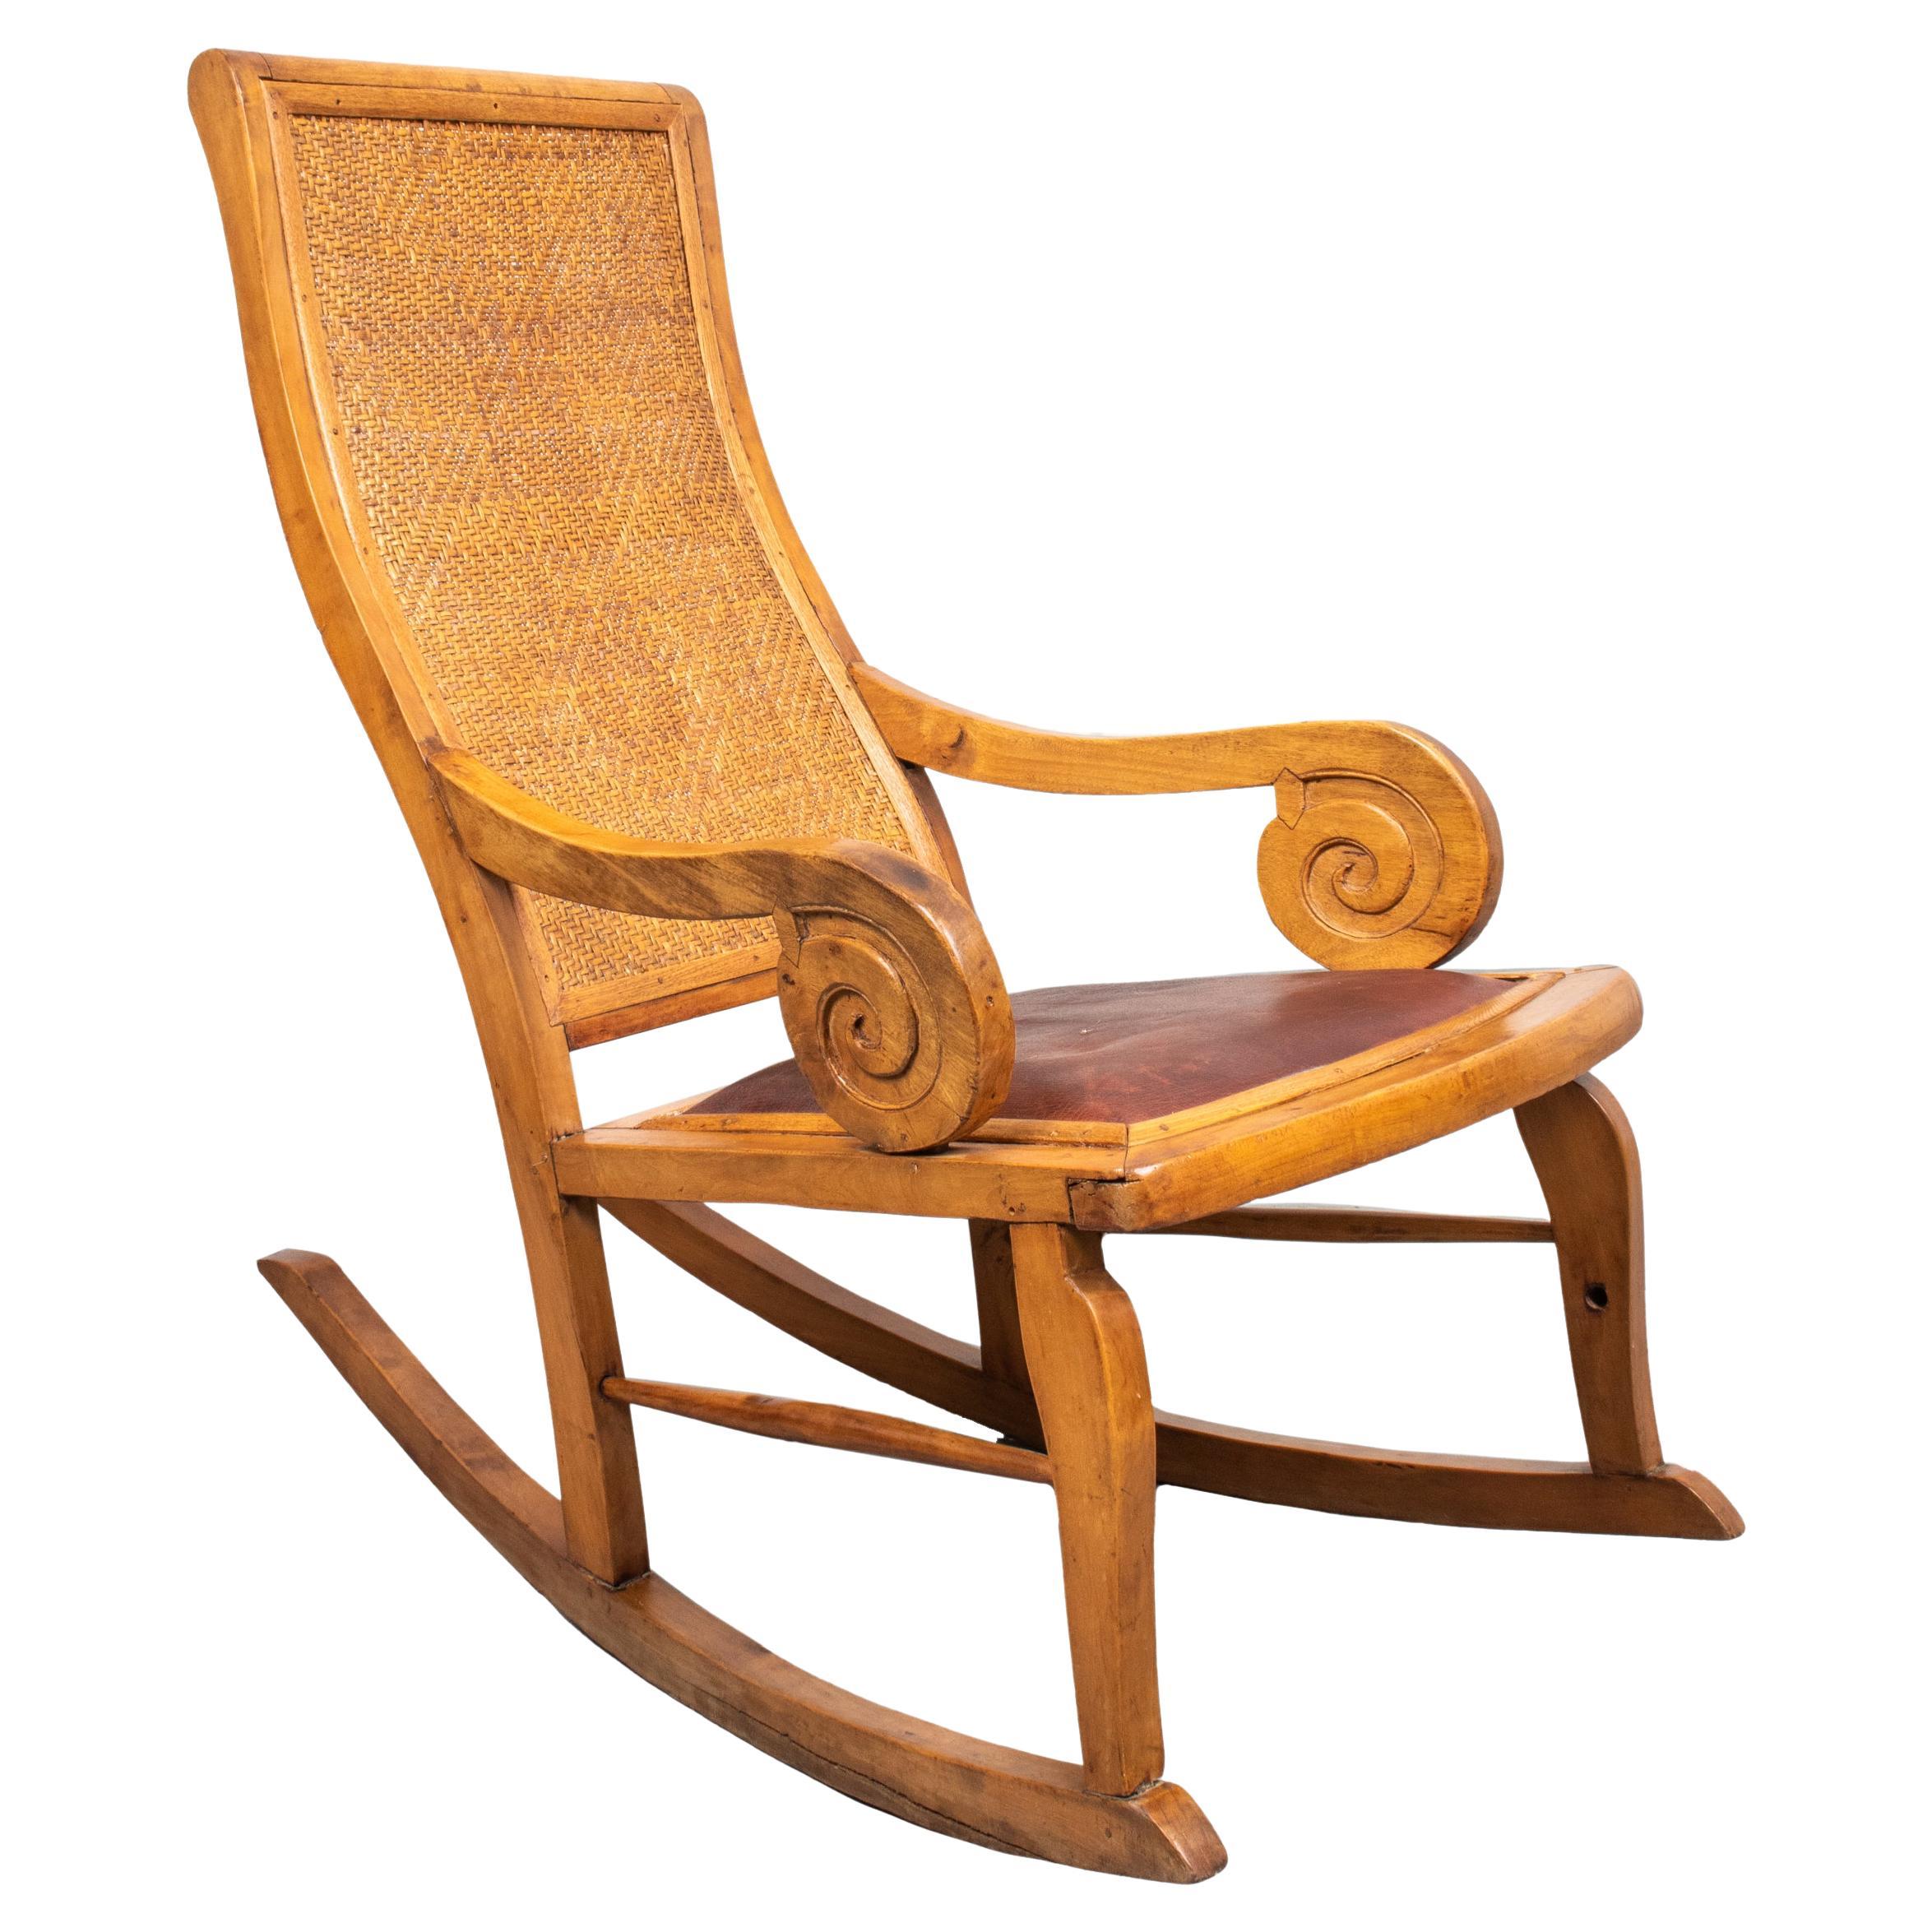 Indonesian Teak Rocking Chair With Leather Seat